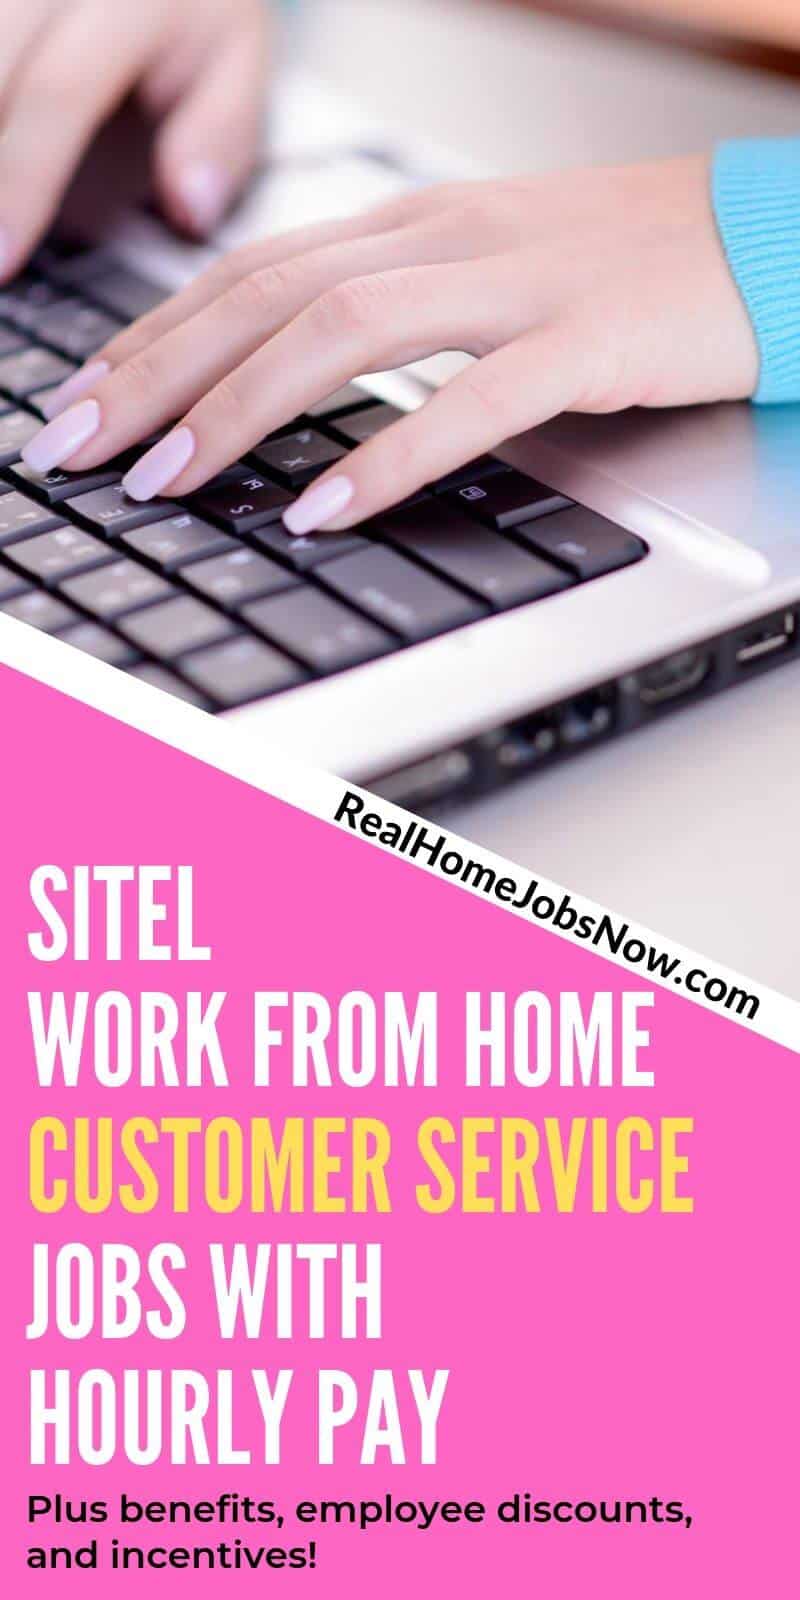 Sitel work from home customer service jobs come with benefits, hourly pay, and incentives! If you are looking for home based work where you will be an employee with paid training, Sitel is hiring now.